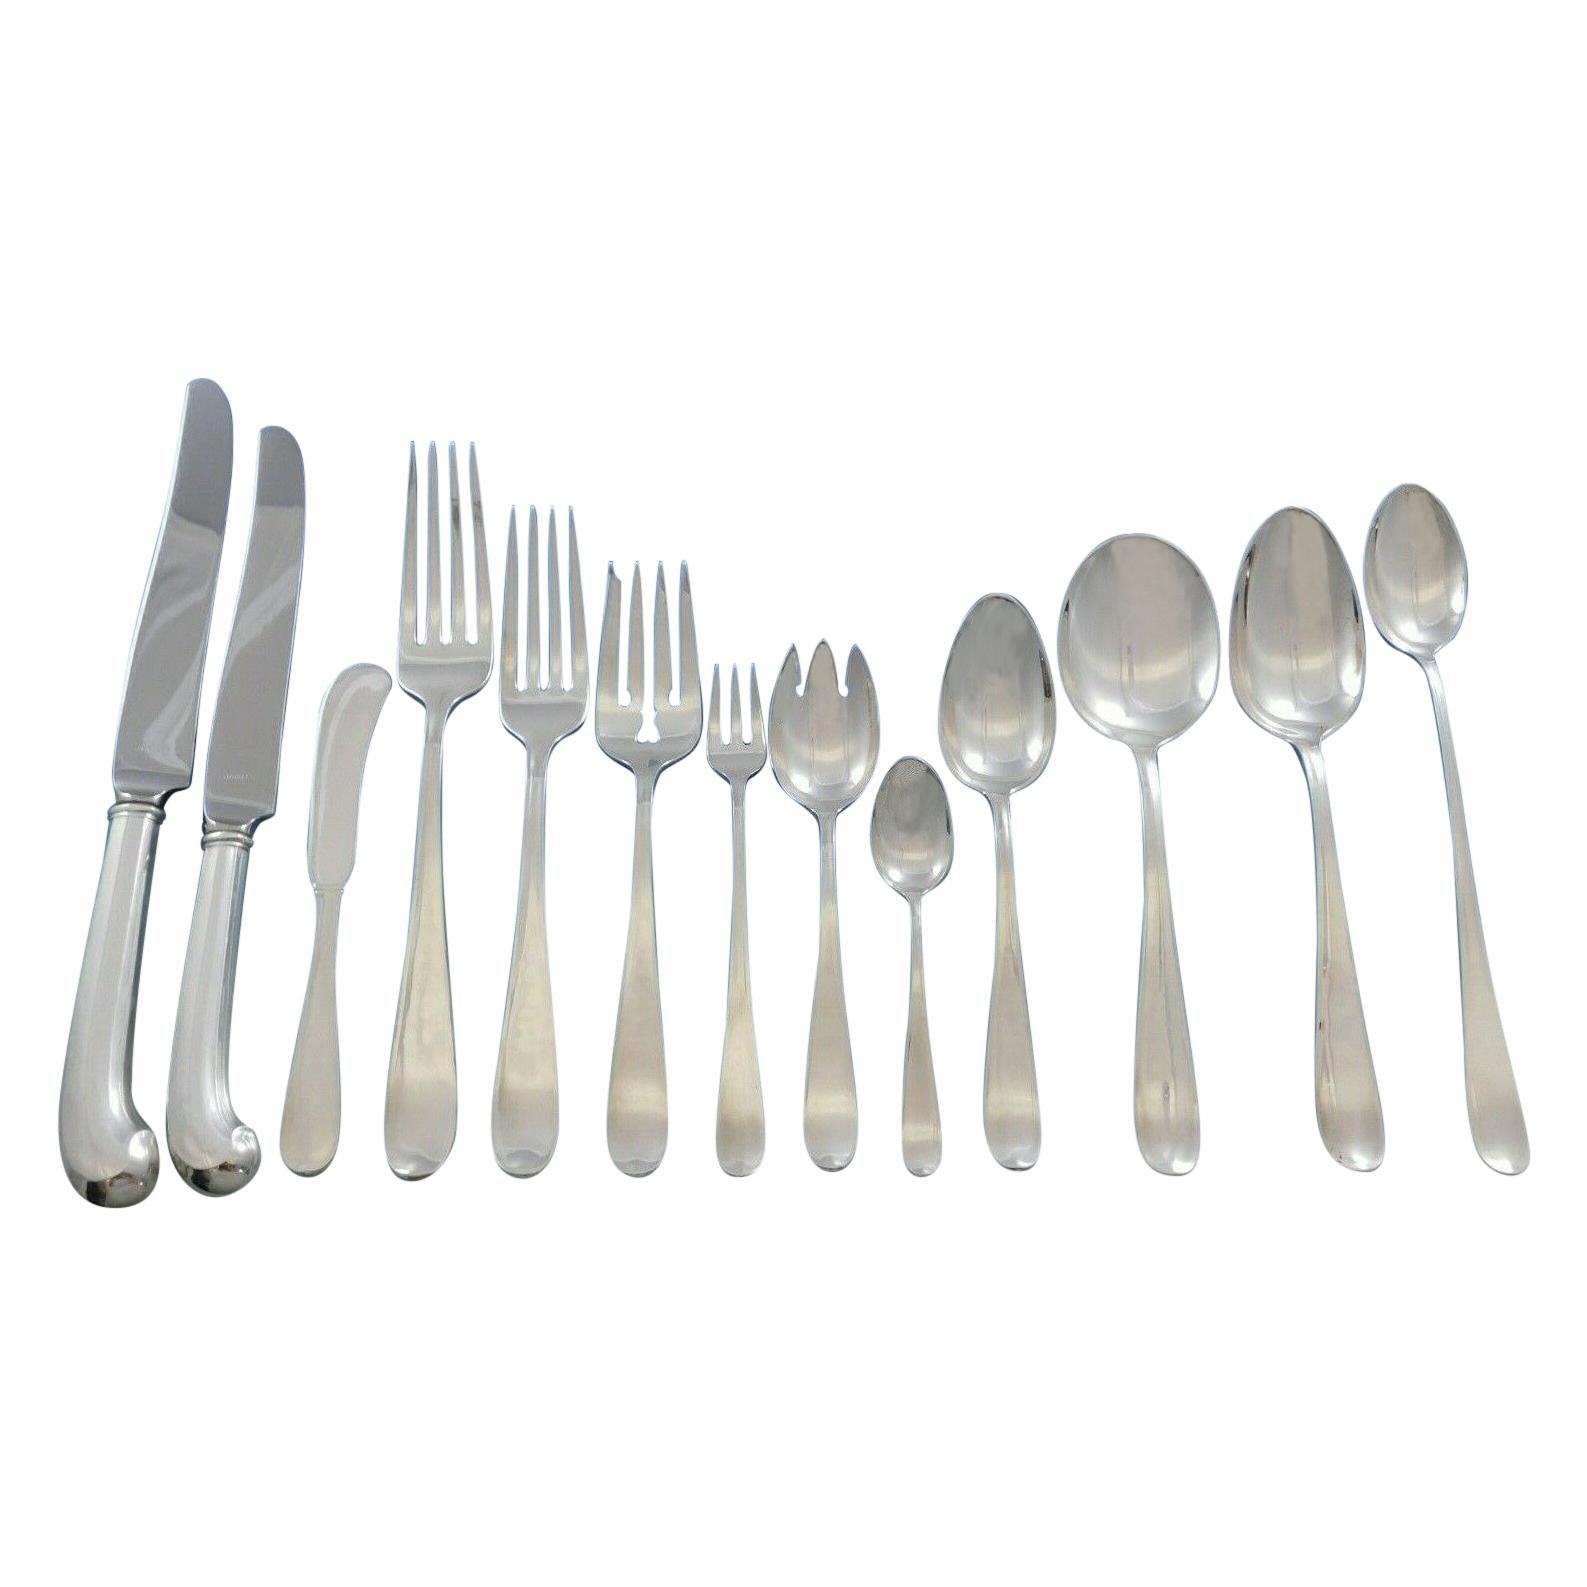 Dolly Madison by Gorham Sterling Silver Flatware Service Set 167 Pieces Dinner